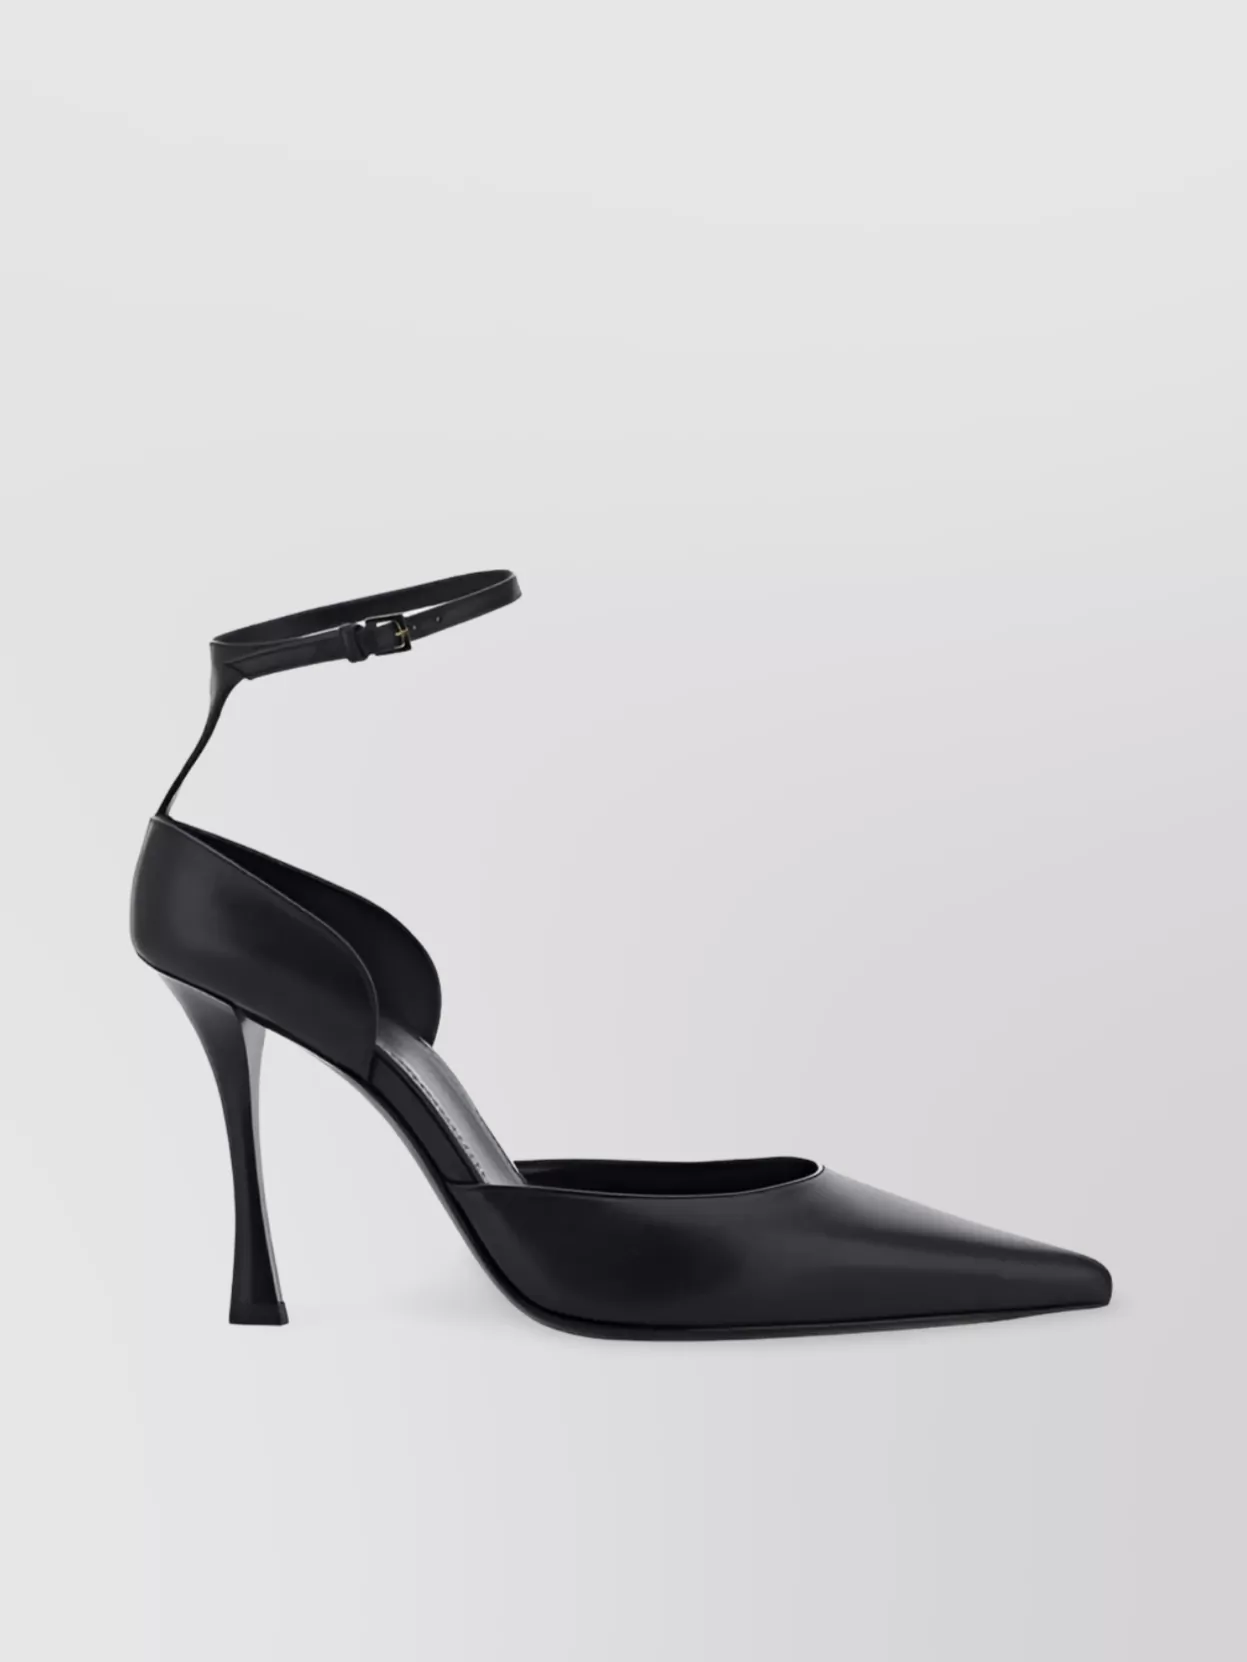 Shop Givenchy Stocking Show Lambskin Pumps